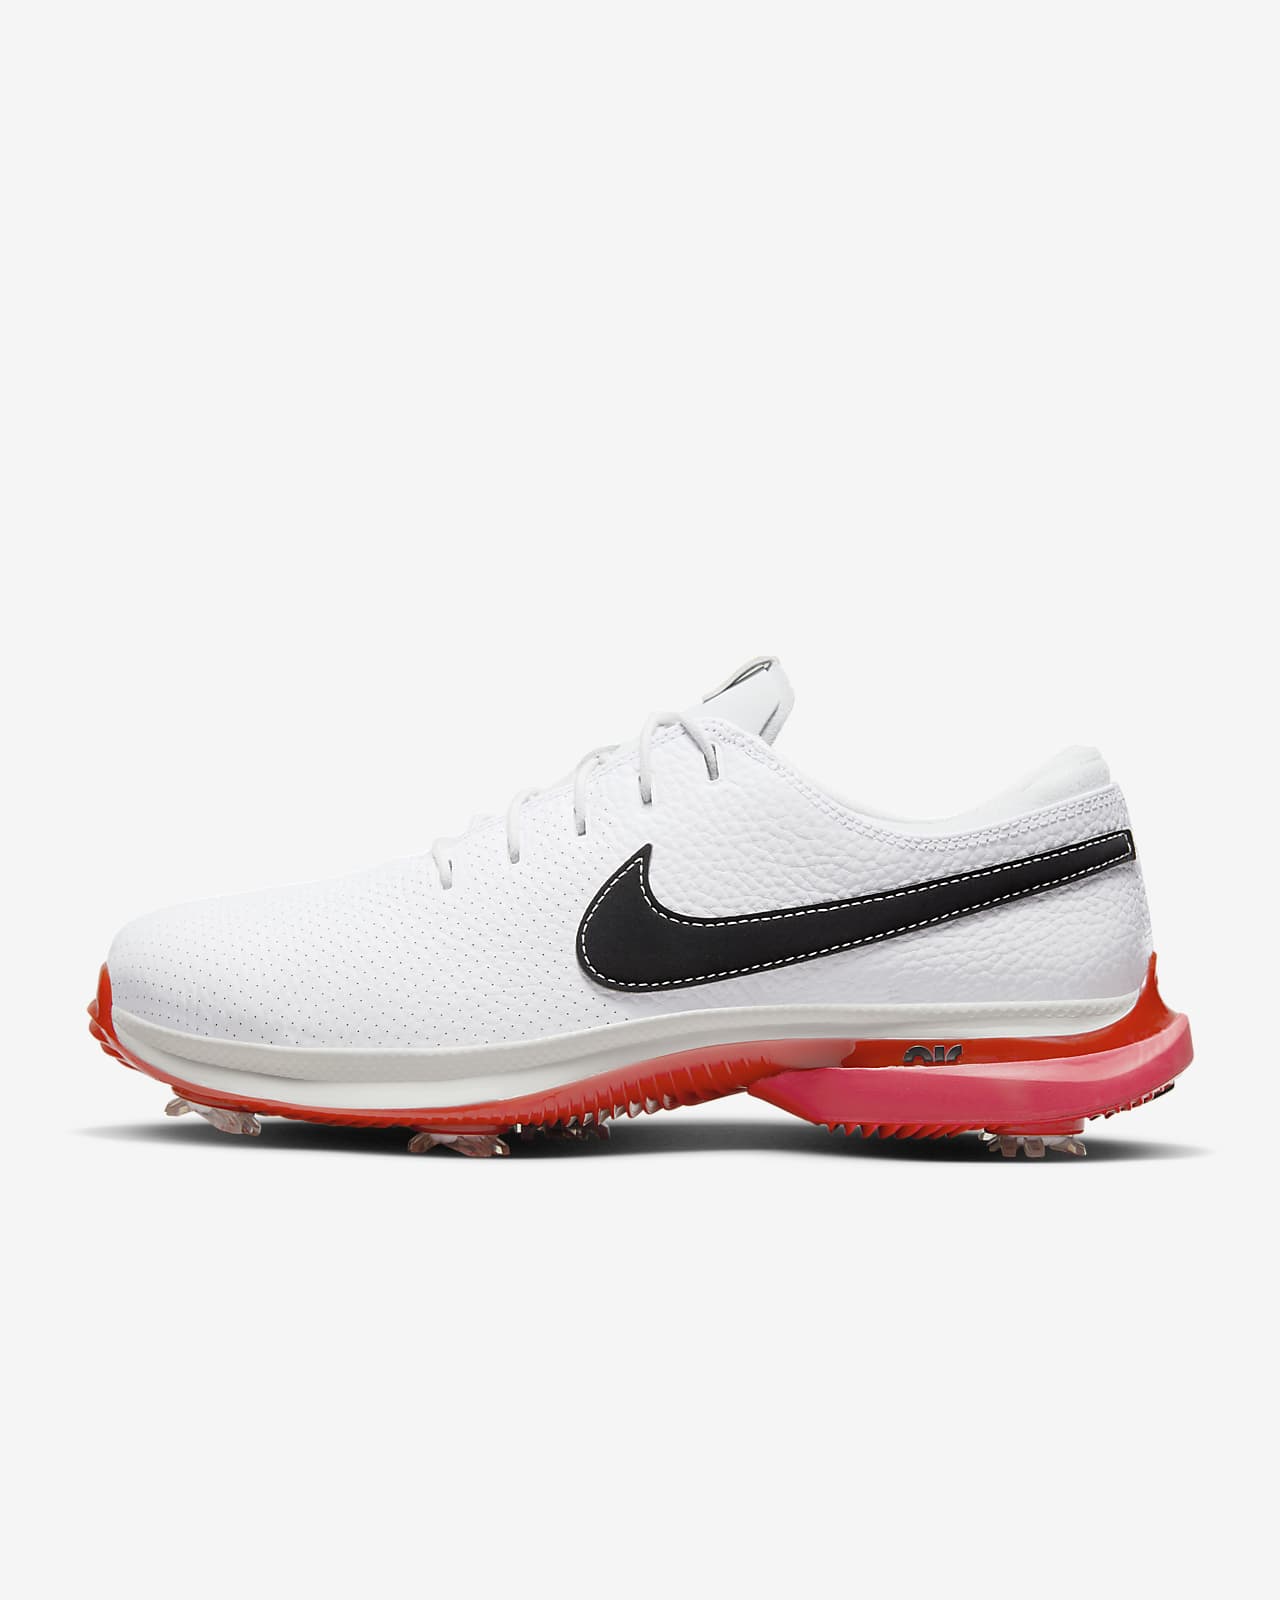 Nike Air Zoom Victory Tour 3 Men's Golf Shoes.